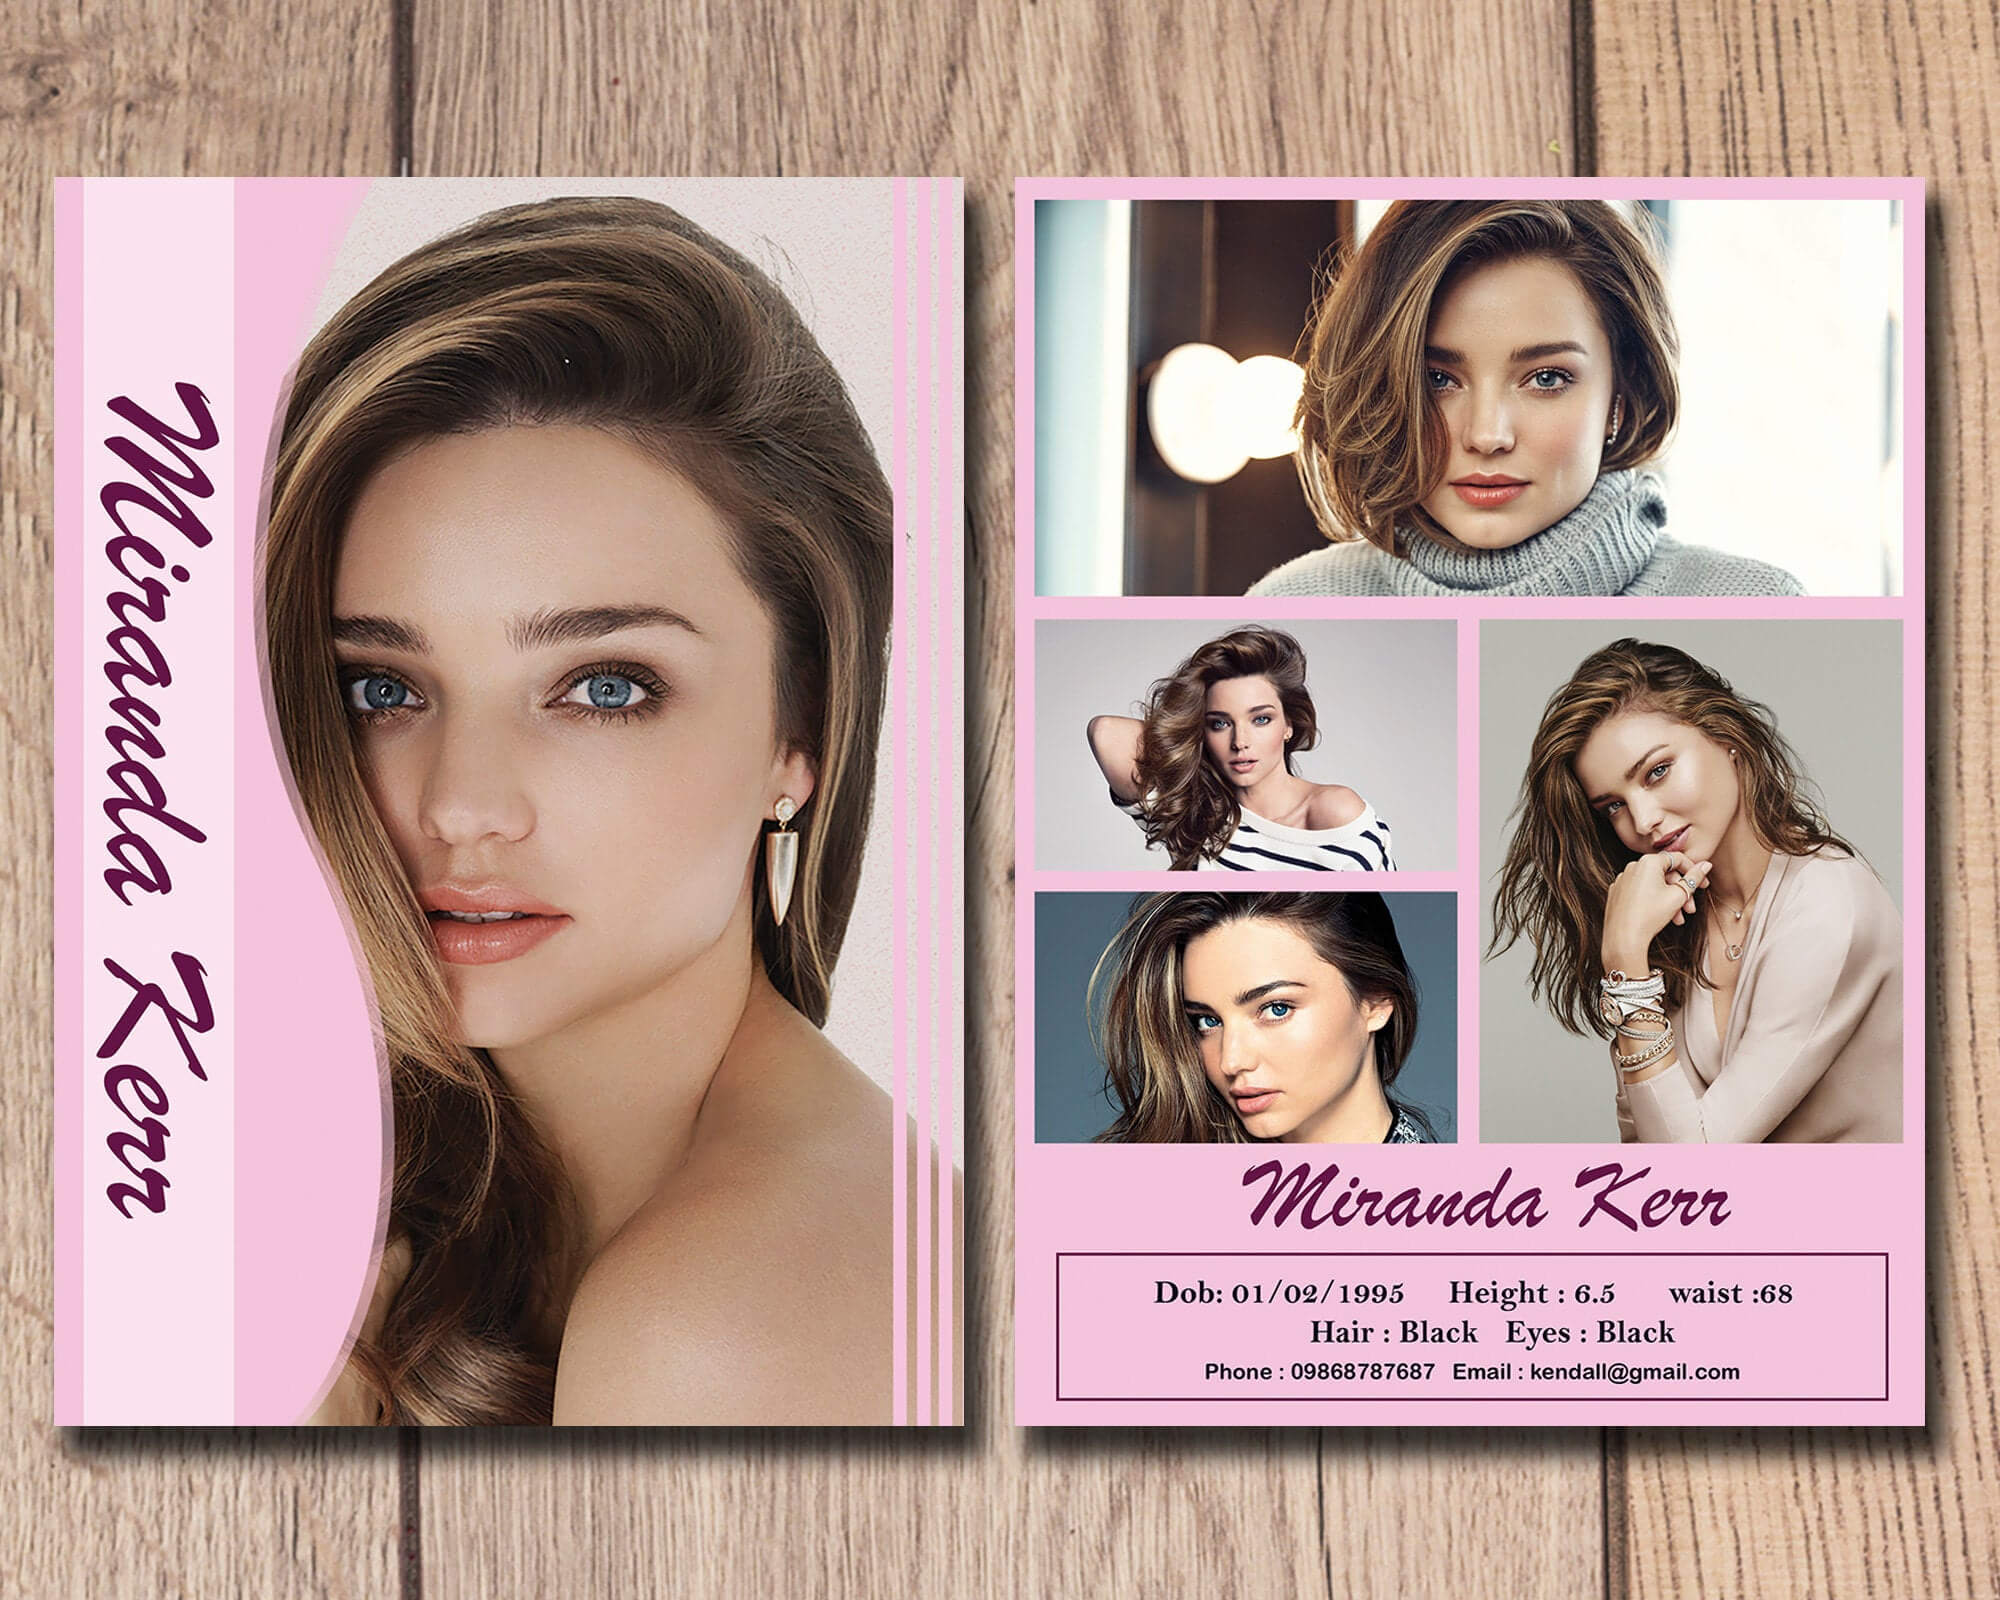 Modeling Comp Card Template | Model Comp Card | Photoshop, Elements & Ms  Word Template | Instant Download In Download Comp Card Template